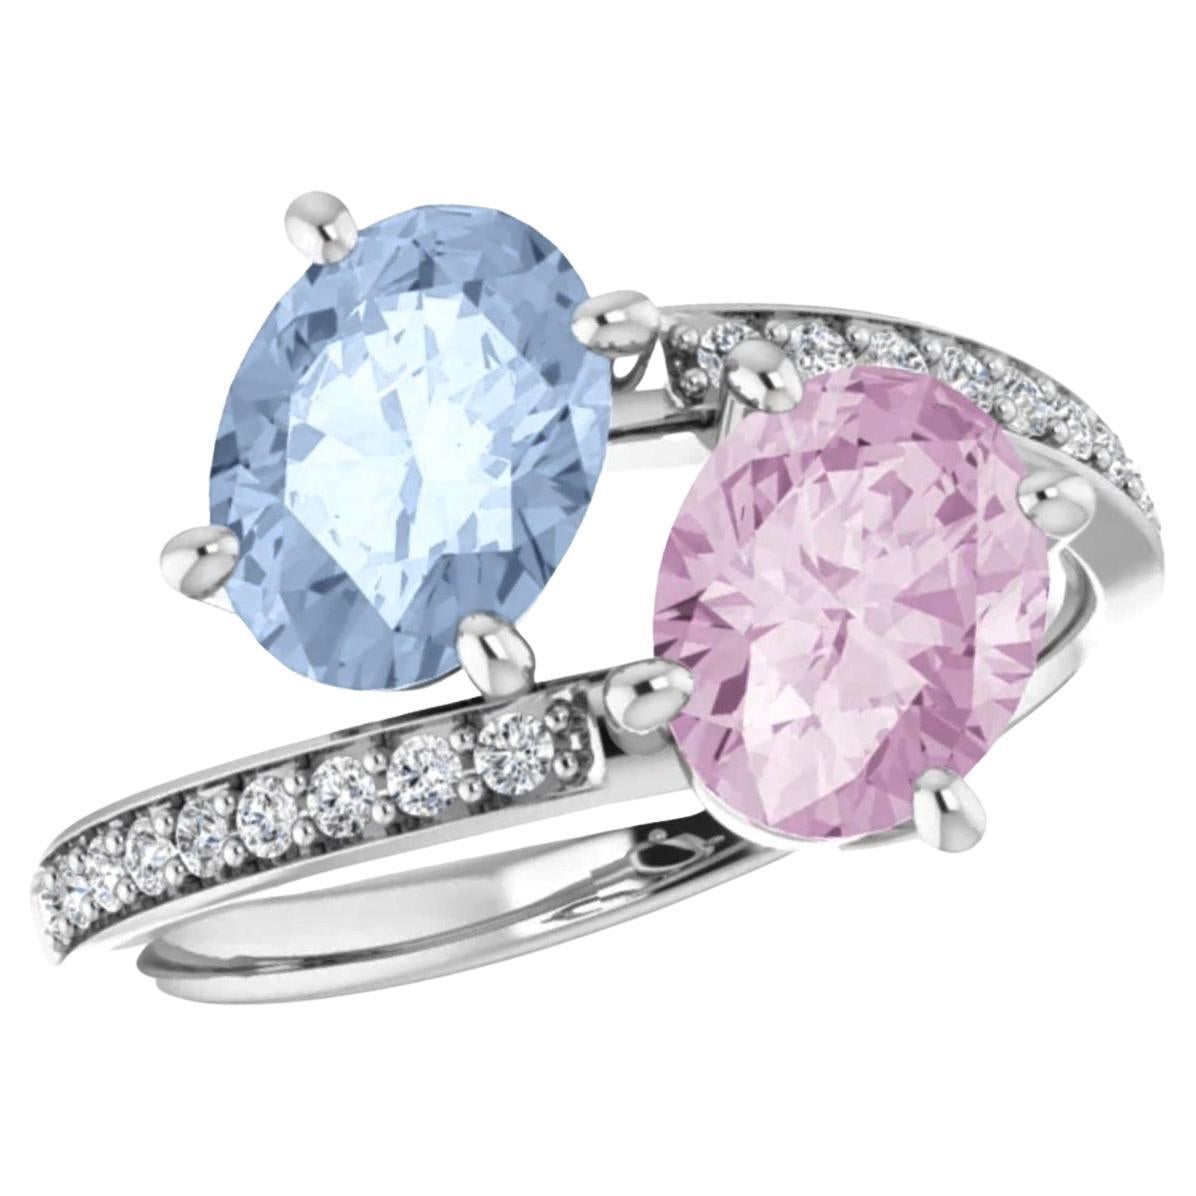 Unheated Fancy Sapphire Ring 2.76 Carat Mismatched Oval Bypass "Toi et Moi" Ring For Sale